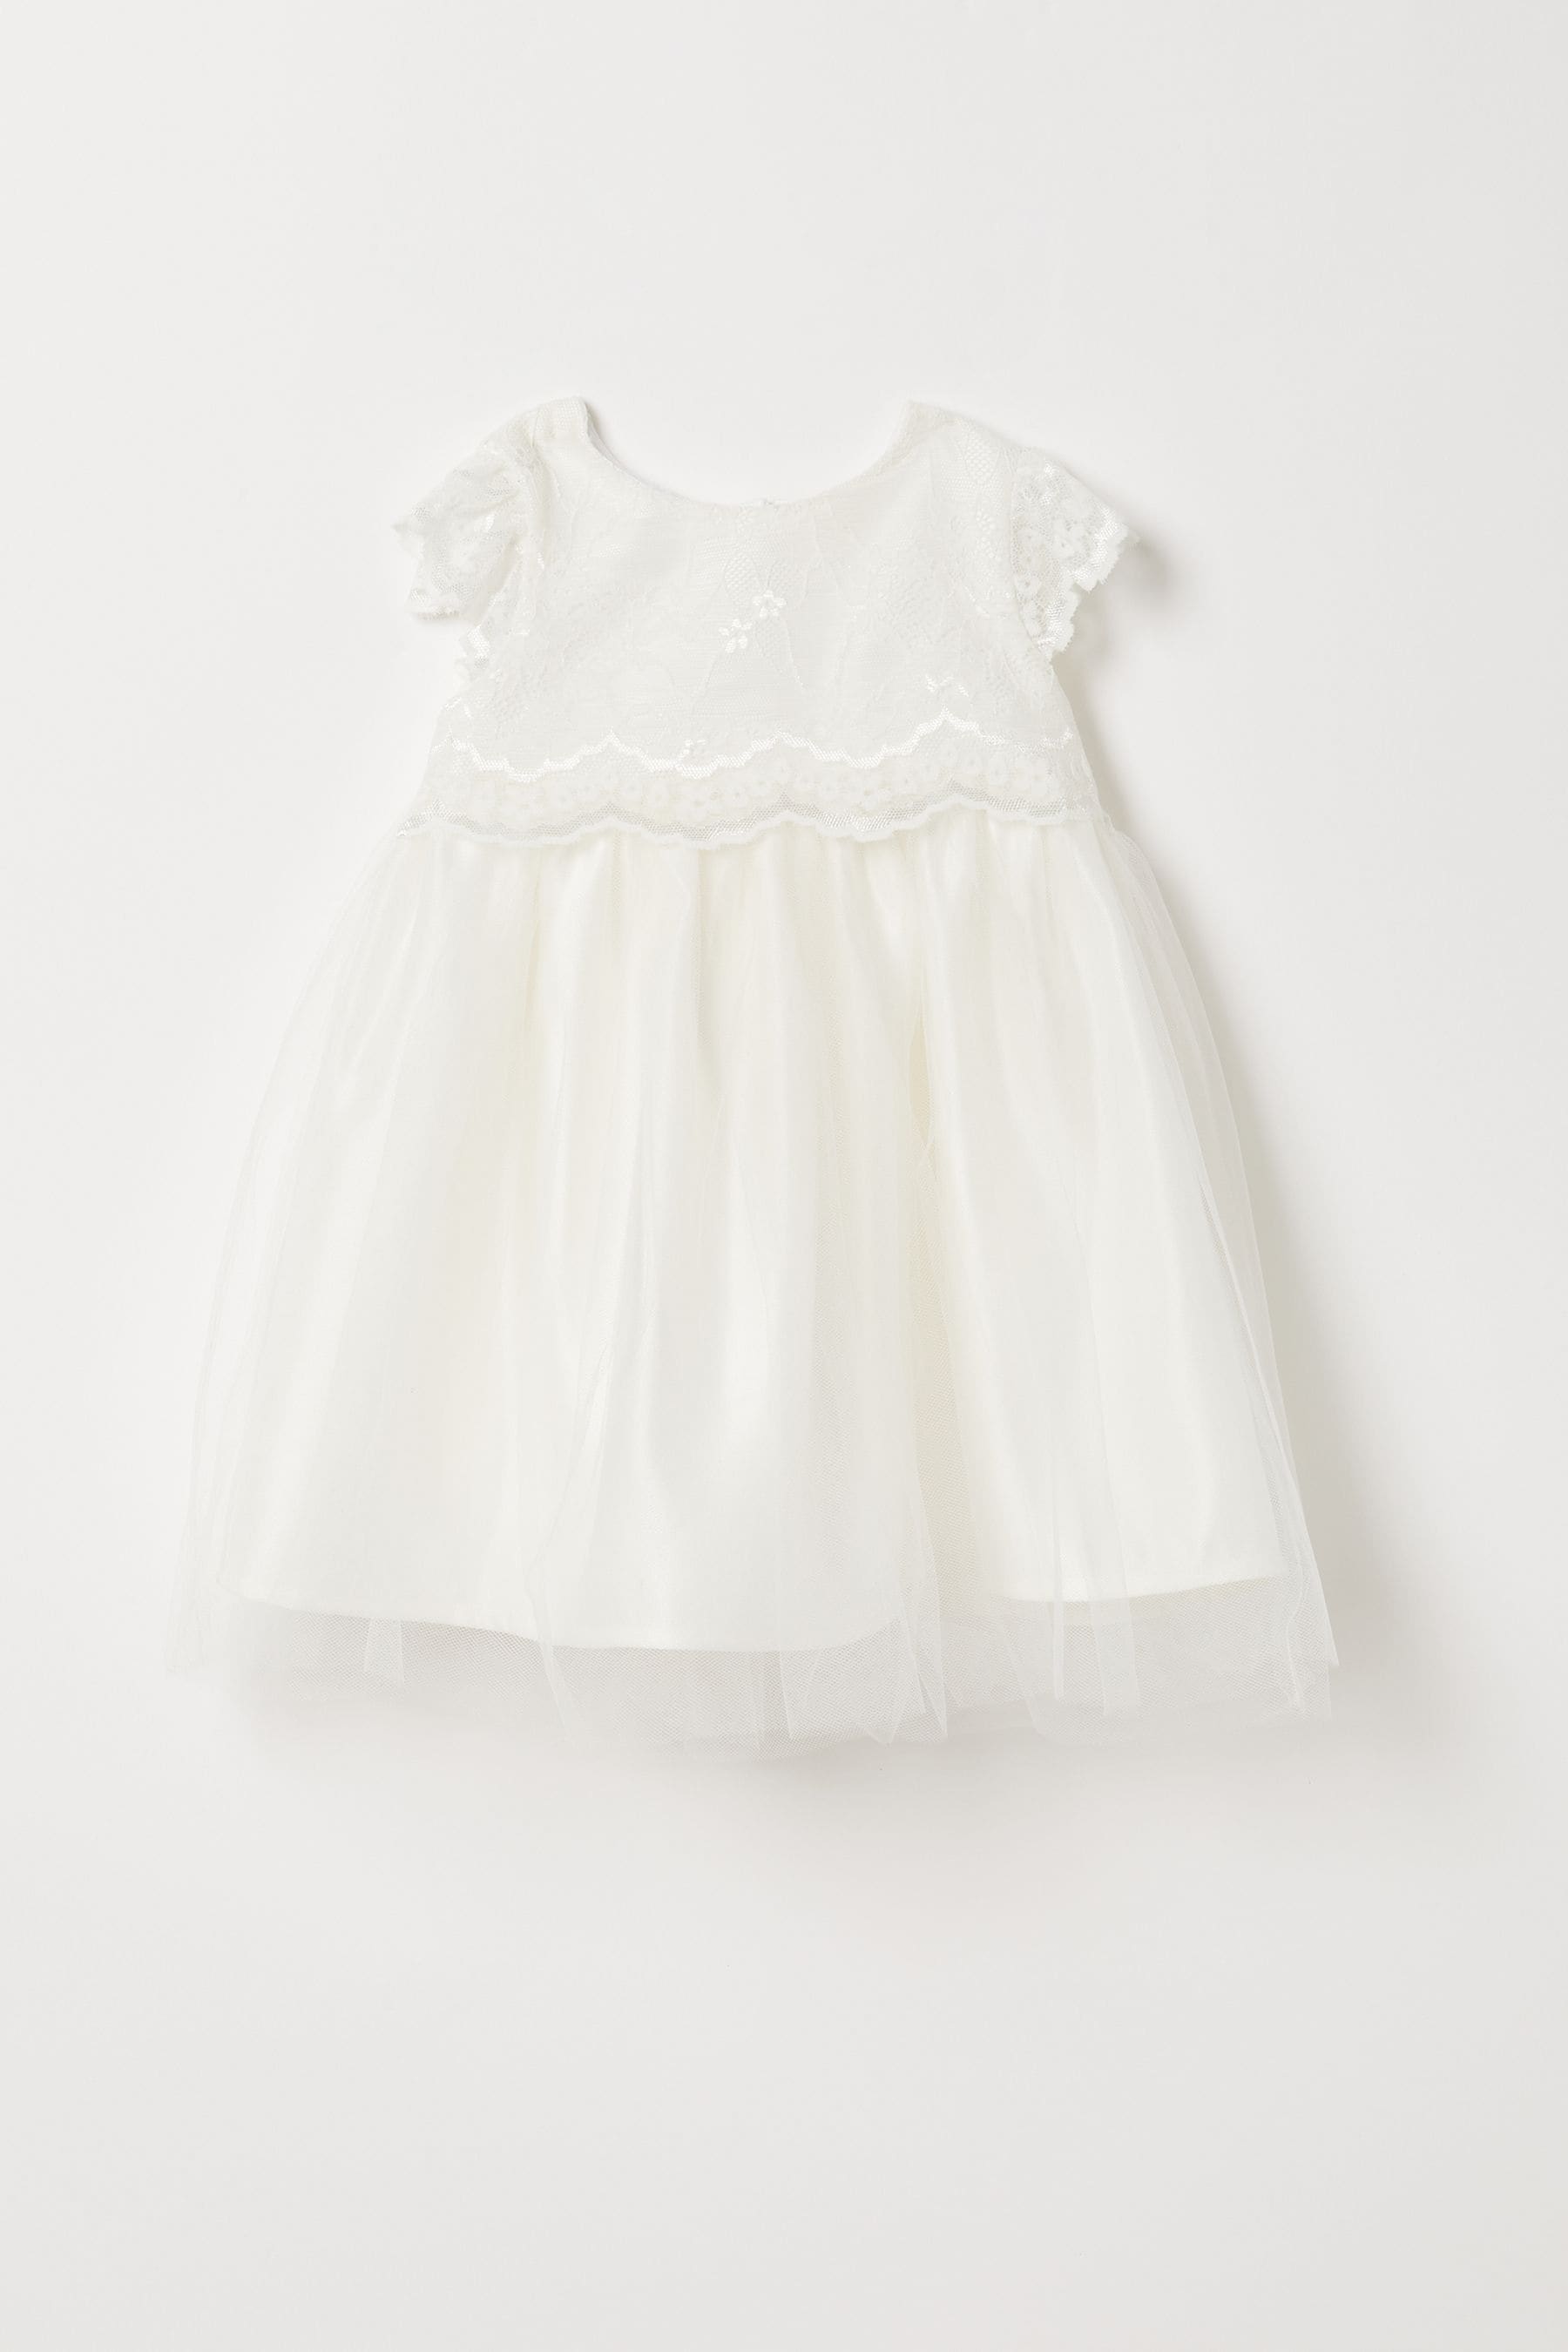 Buy Lipsy Ivory Lace Baby Flower Girl Dress from the Next UK online shop